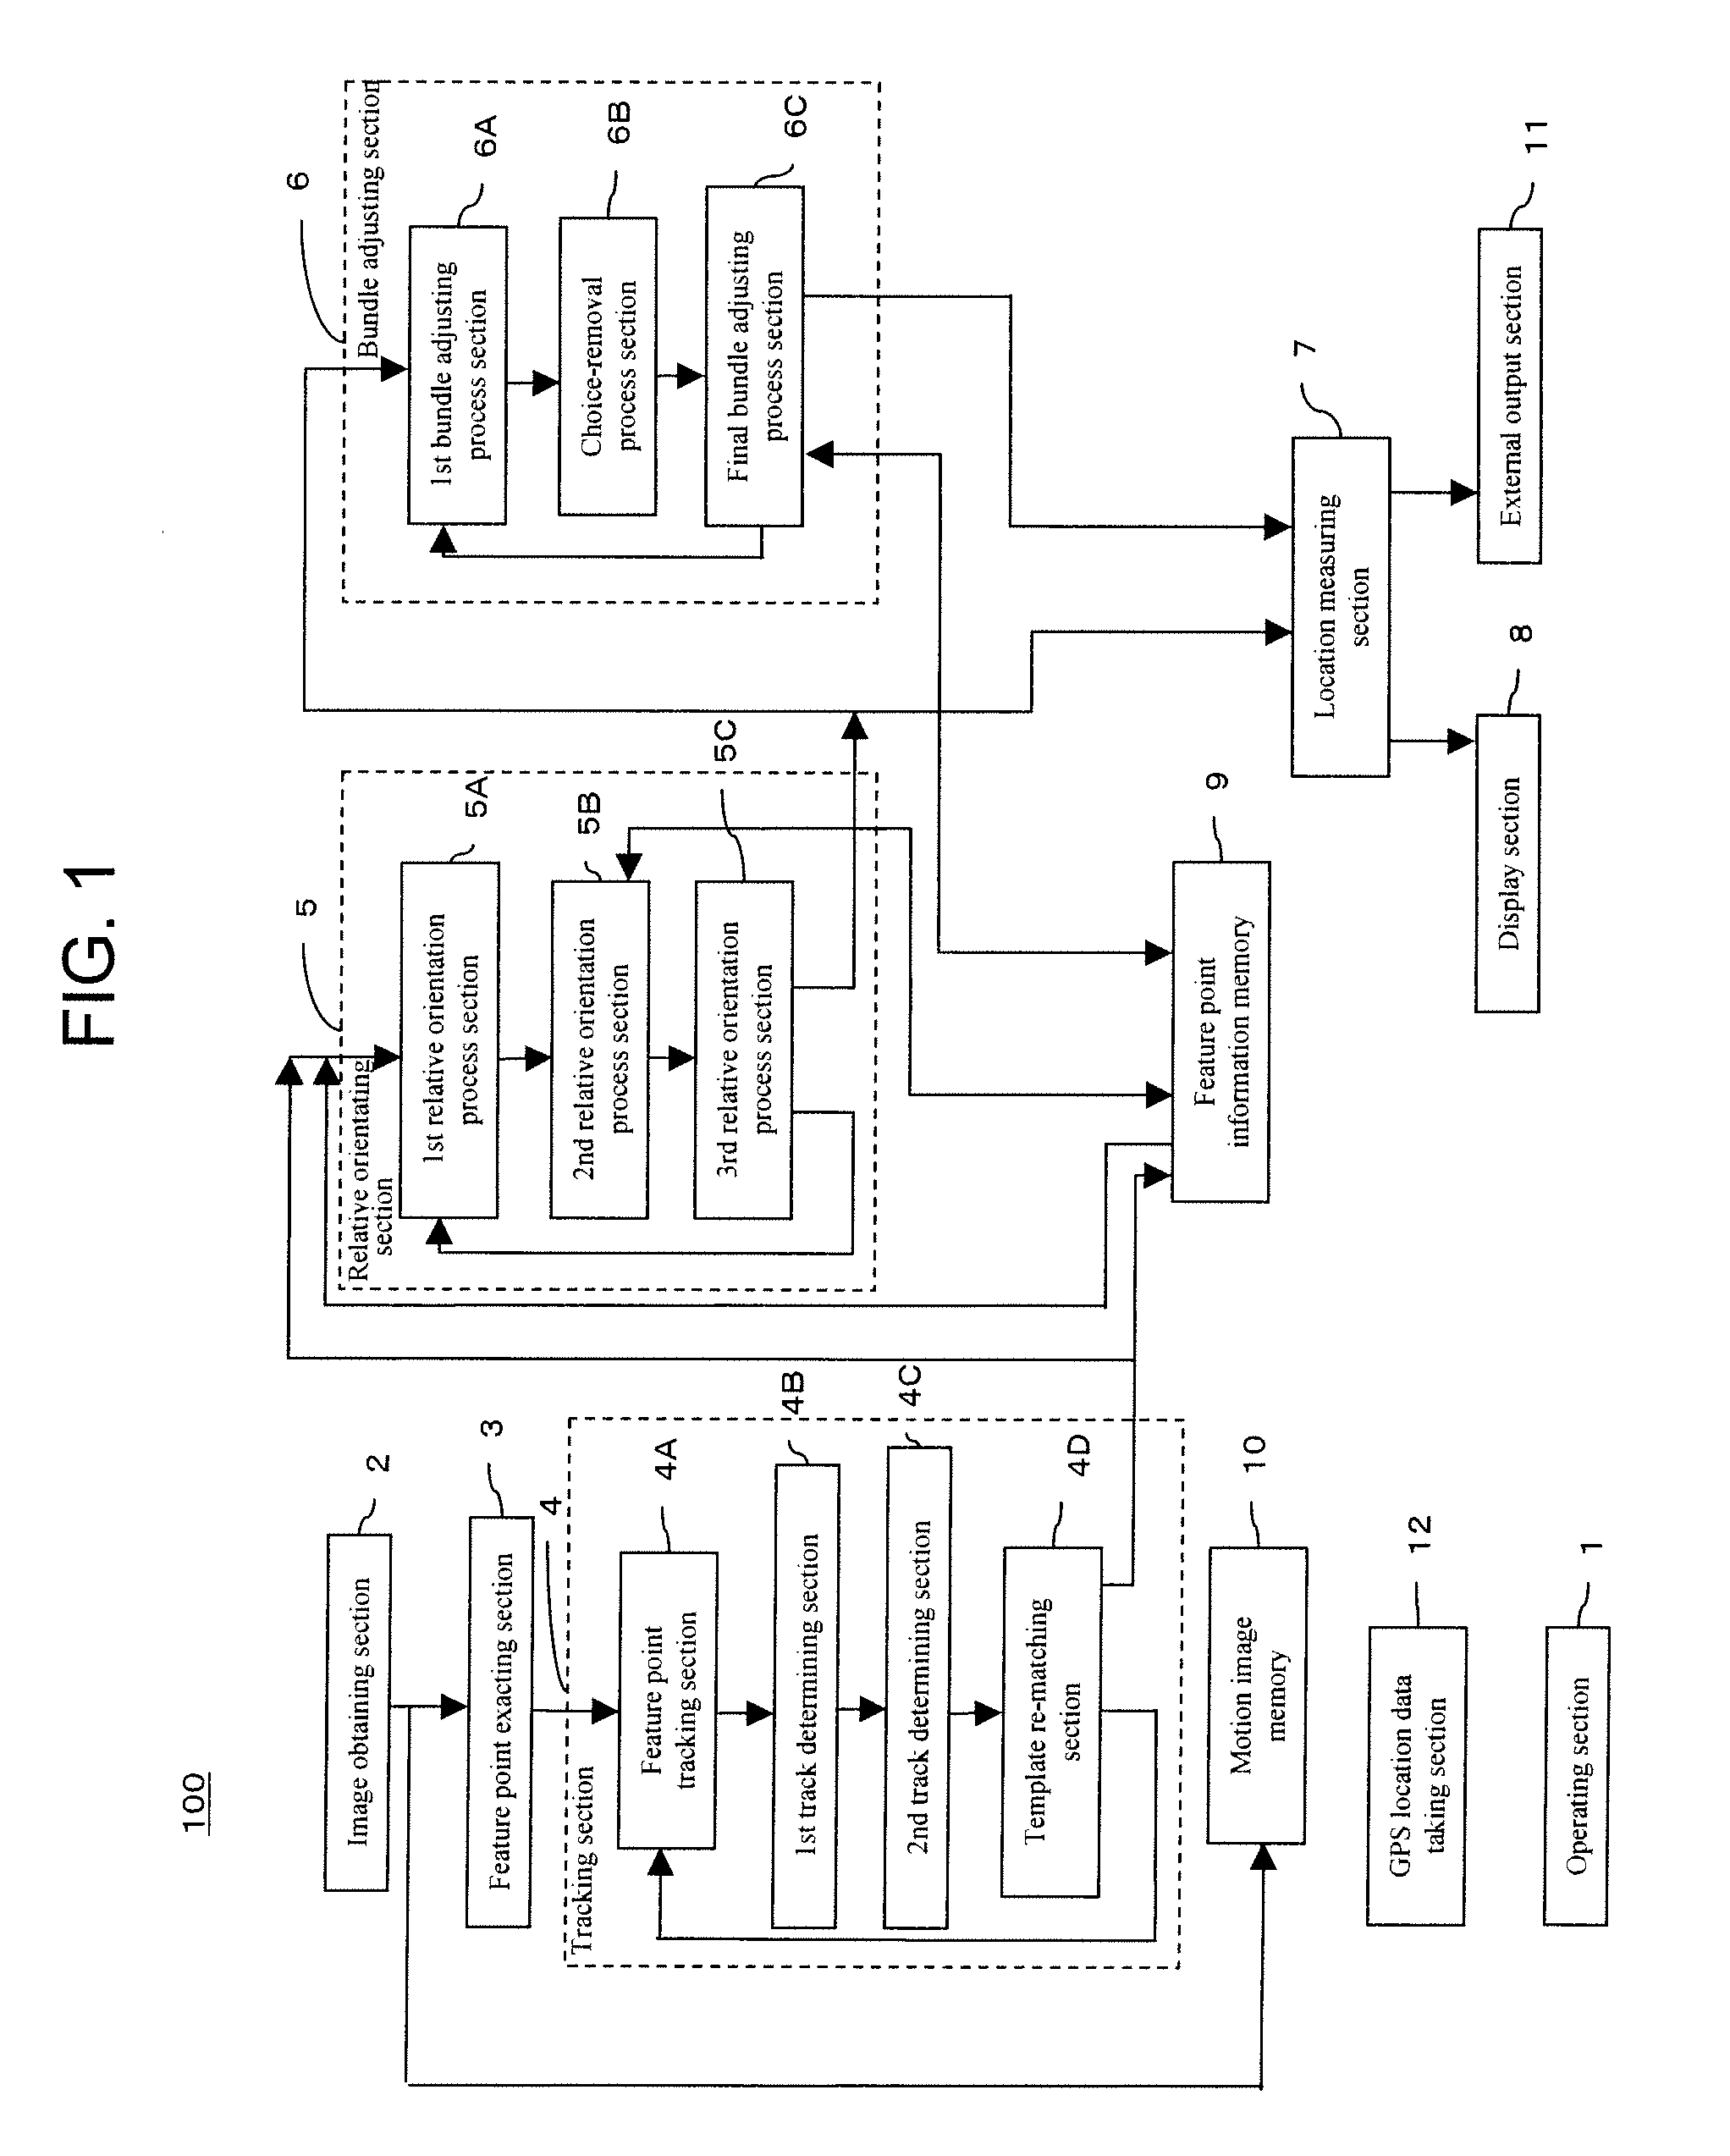 Location measuring device and method